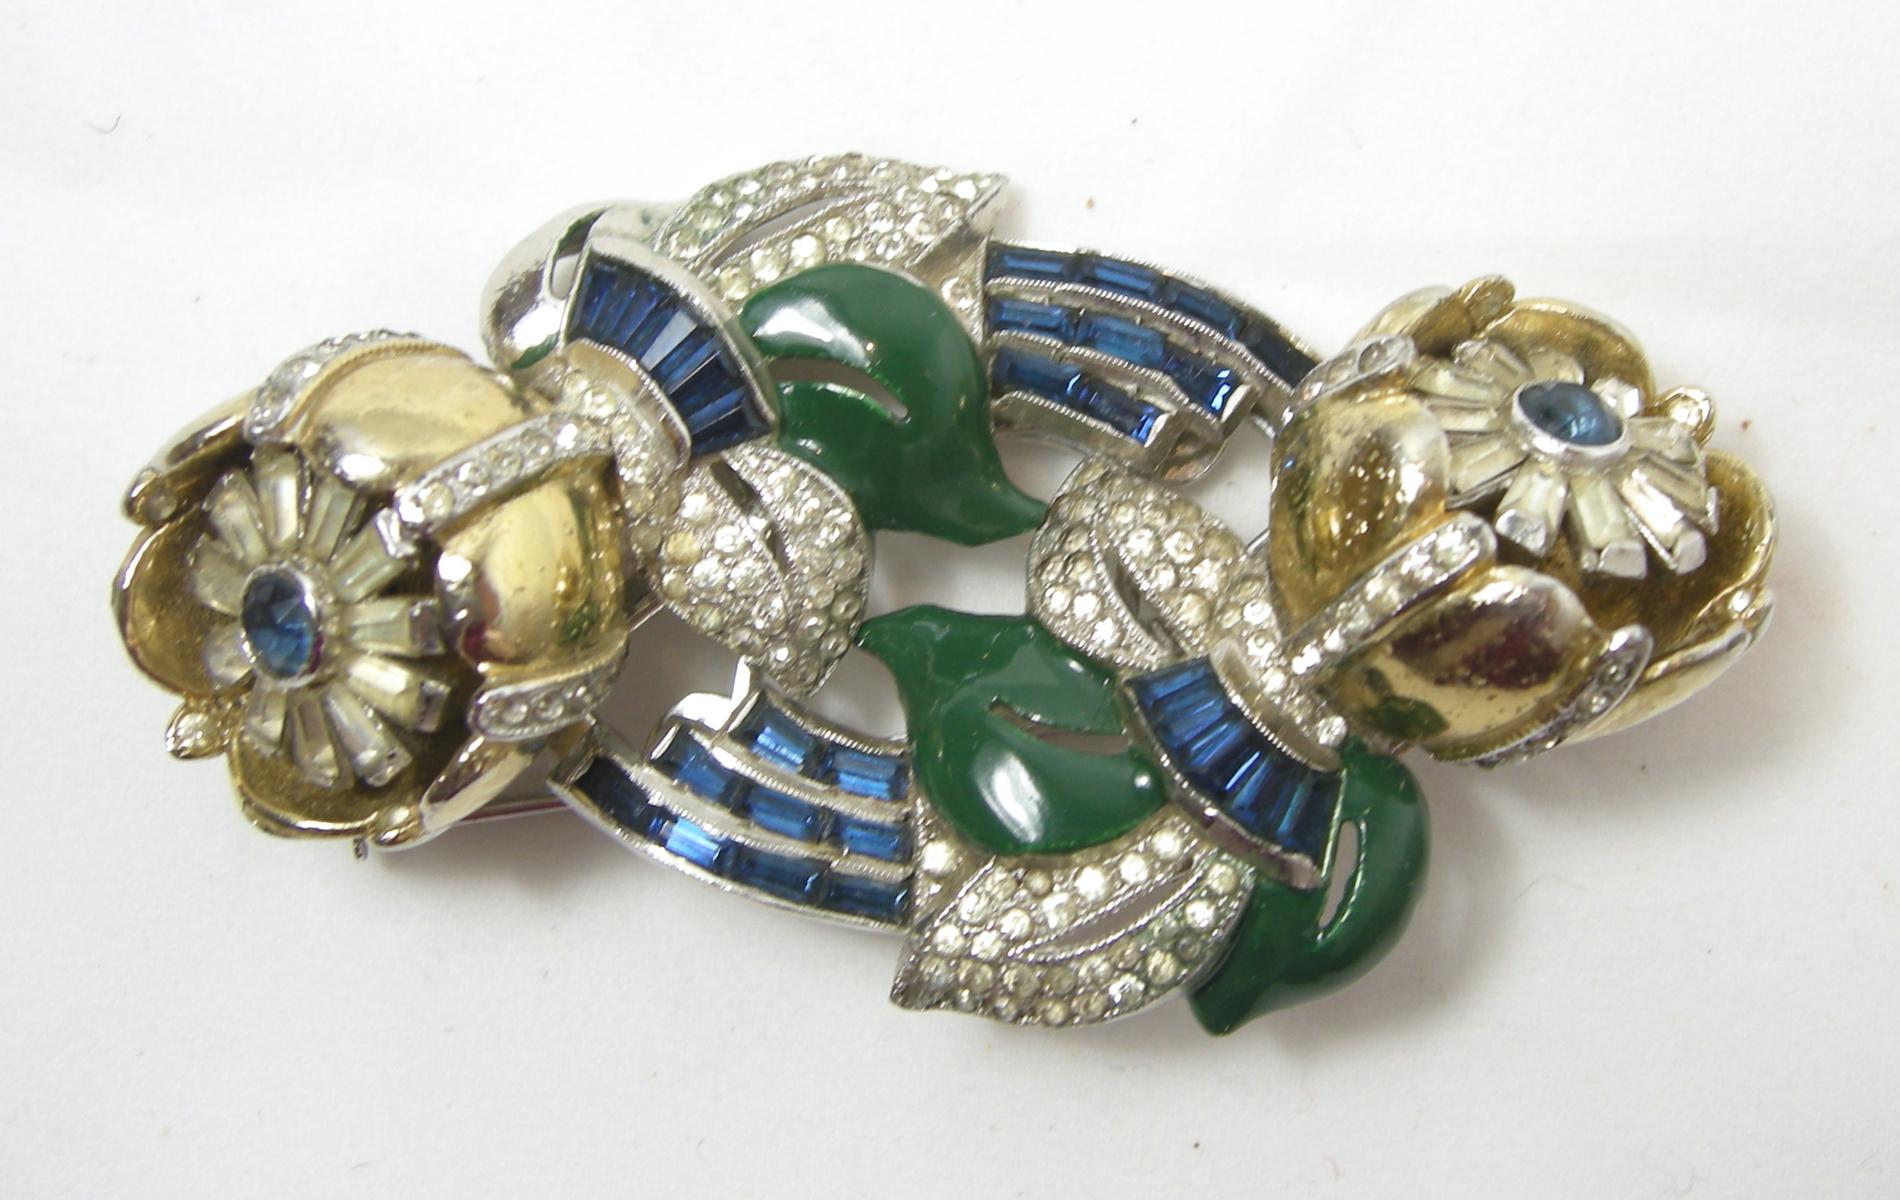 This vintage Coro duette & earrings has the famous trembler floral design with blue and clear crystal with green enameling in a gold tone setting.  The screw-clip earrings measure 7/8” diameter and the duette brooch is 3” x 1-3/4”.  This vintage